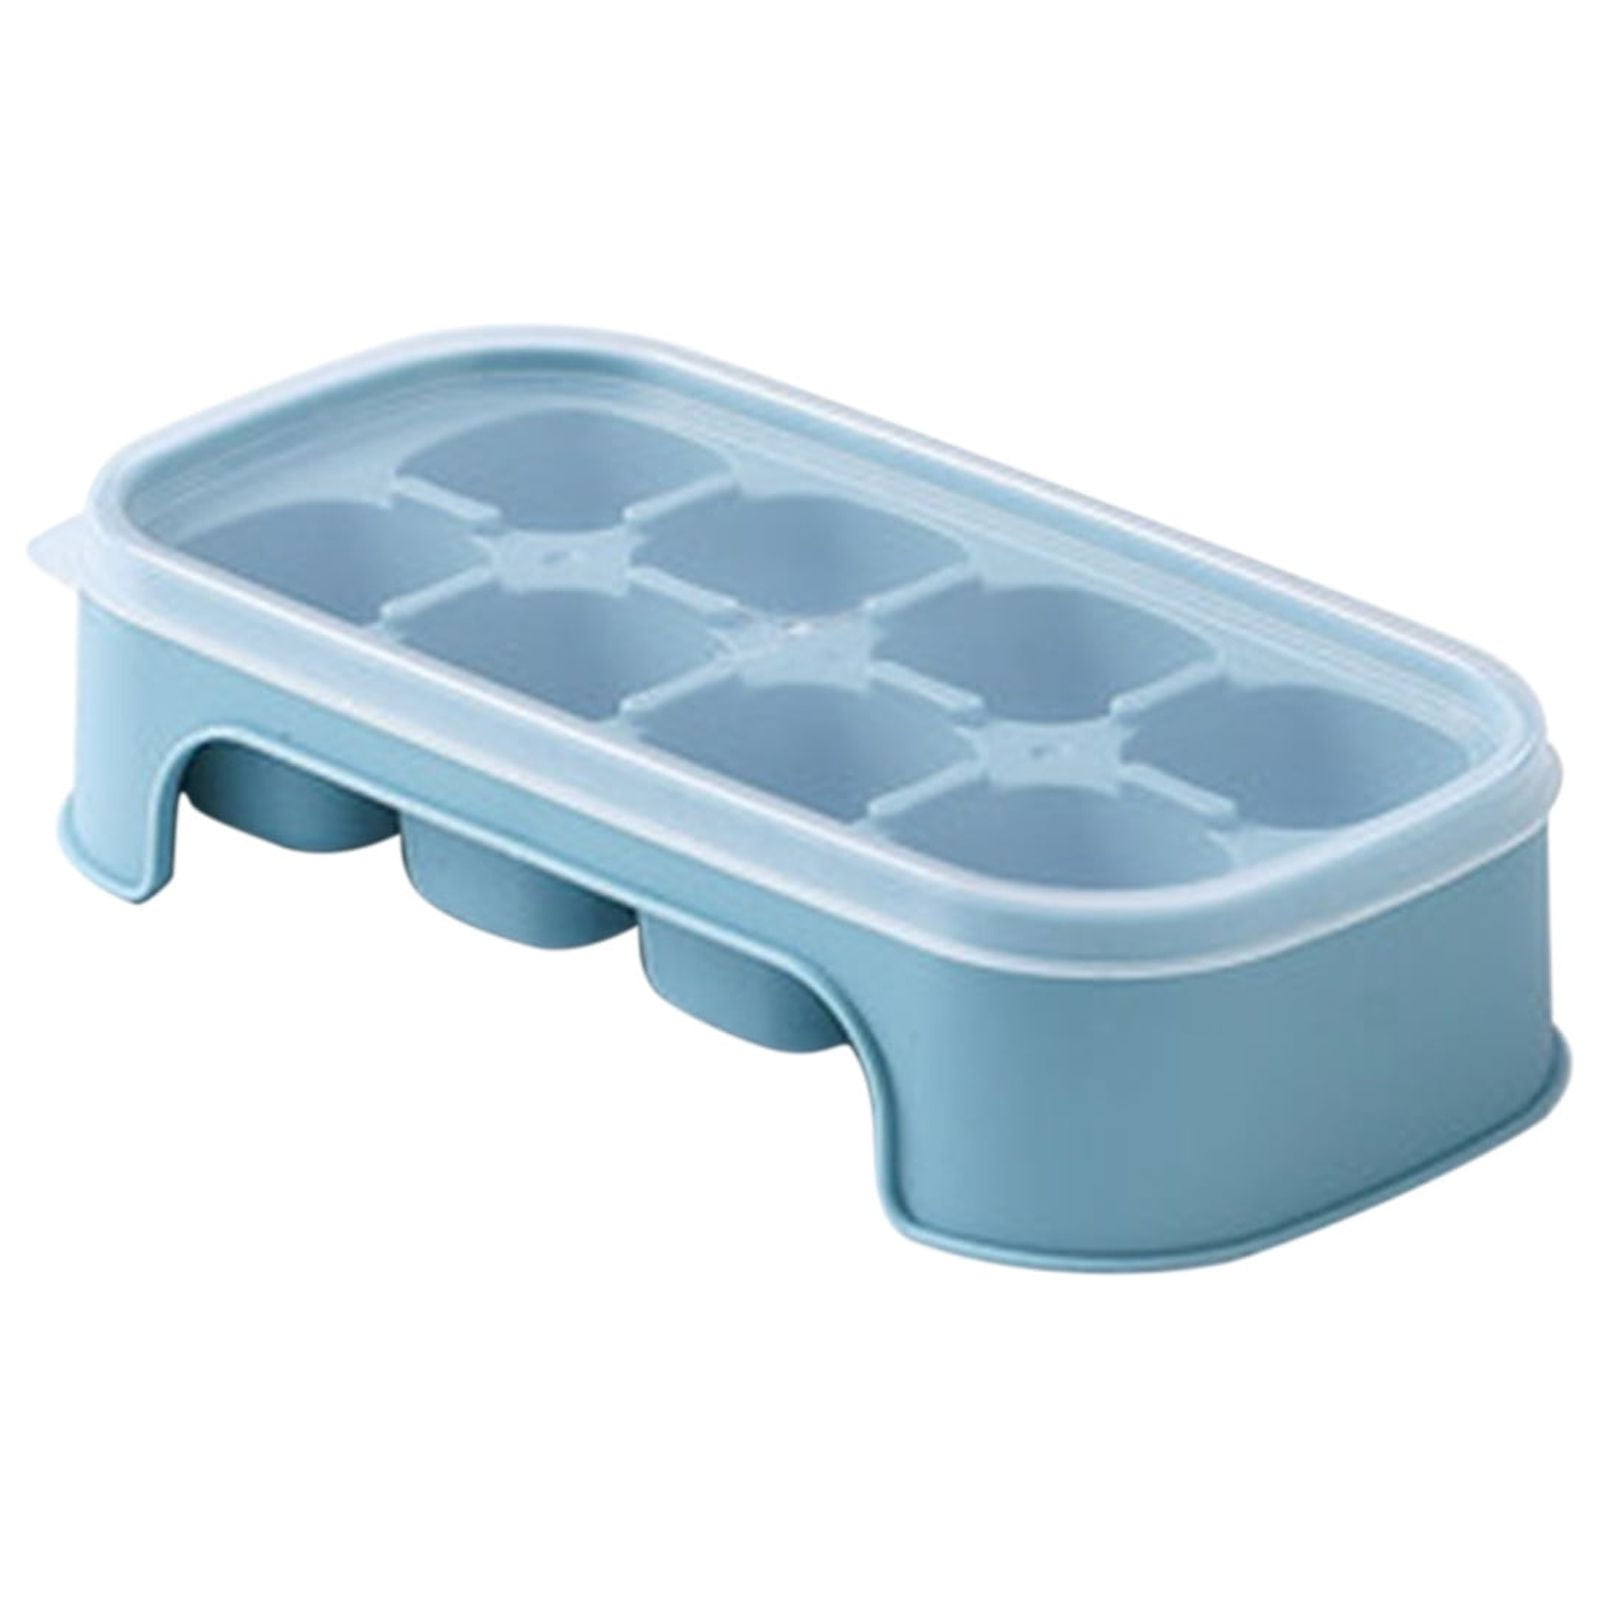  KIYOKI Ice Cube Trays for Freezer 3 Pack - Mini Ice Cube Trays  with Lid & Easy-Release Silicone Bottom, Stackable Small Ice Cube Molds,  Blue+Red+Mint Green: Home & Kitchen